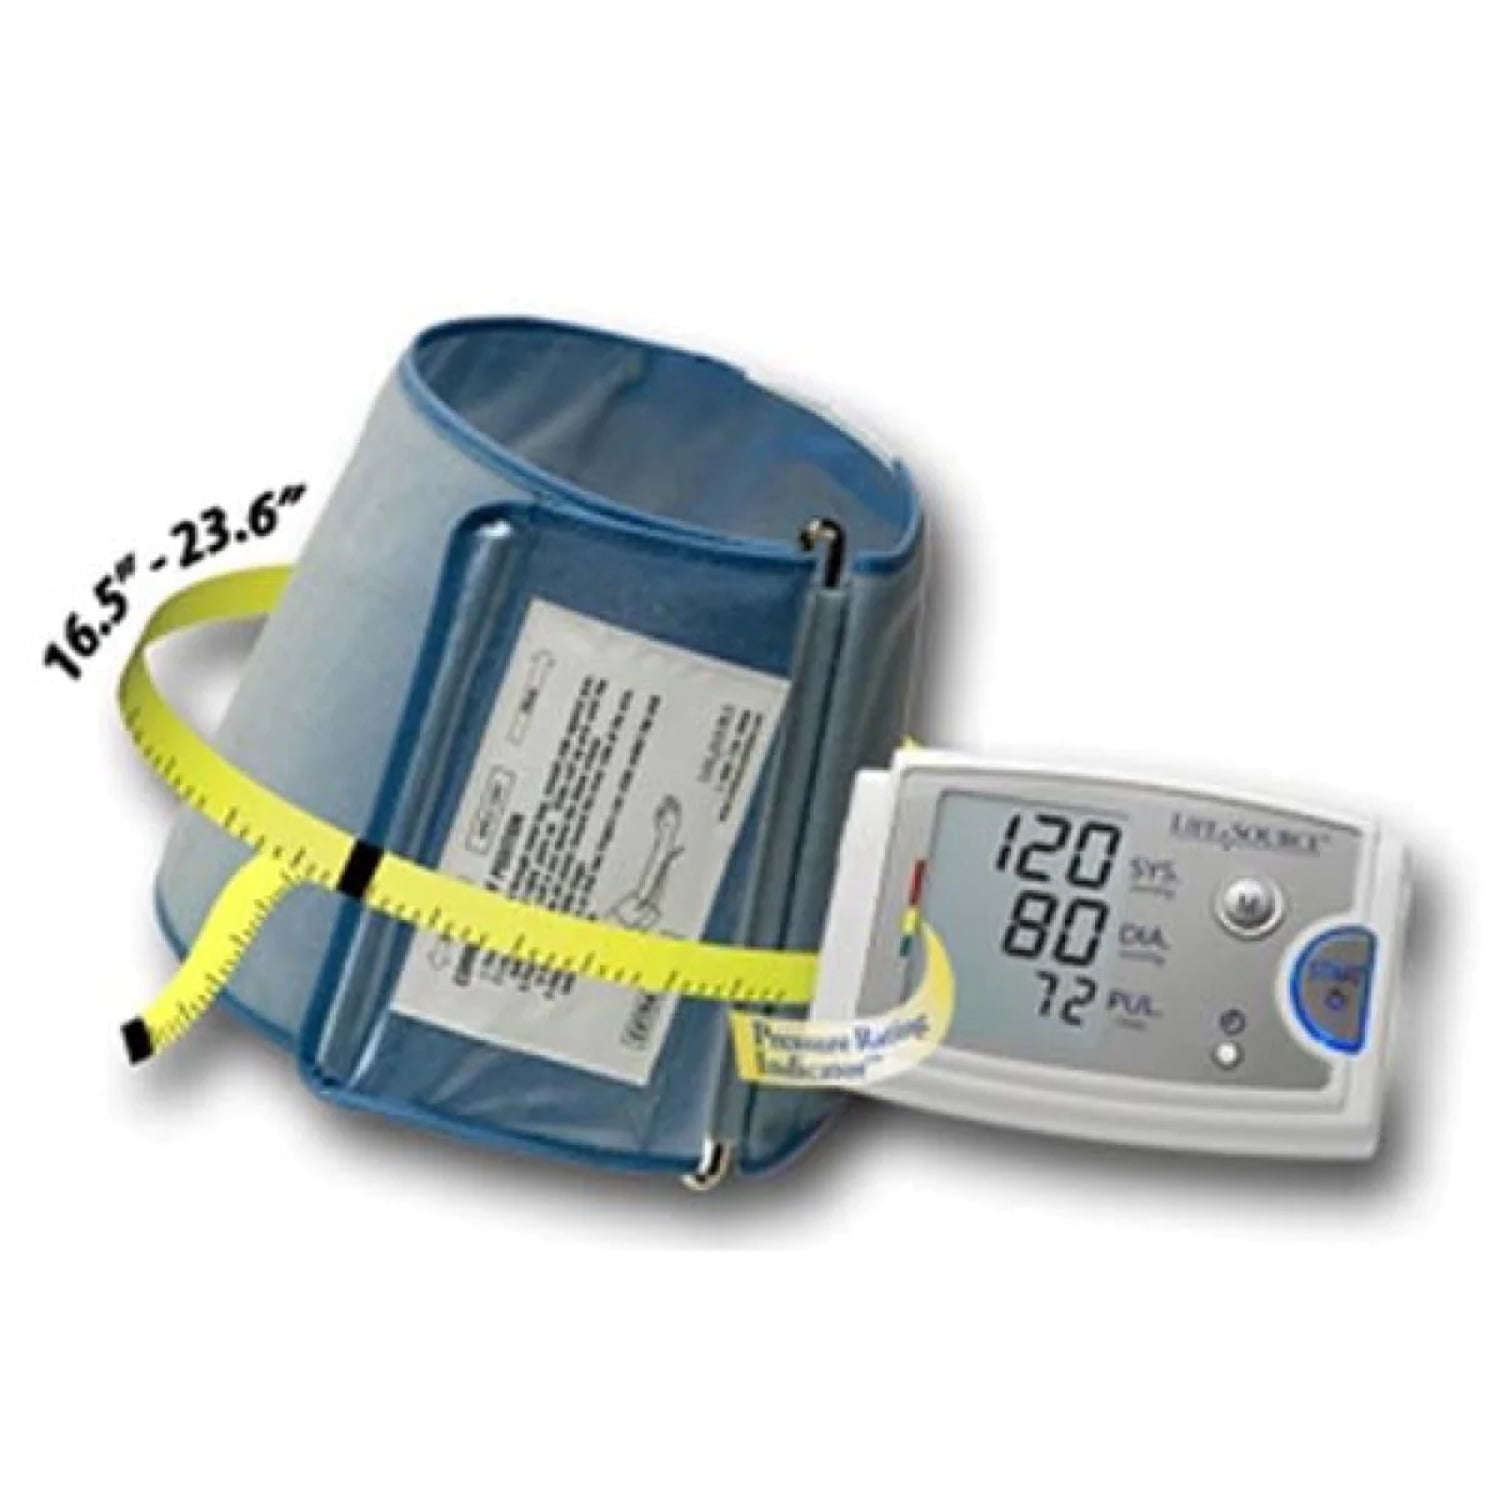 Blood Pressure Machine Upper Arm, 2 Size Cuffs, Medium/Large 9-17 and  Extra Large 13-21, Accurate Automatic Digital BP Cuff Home Use, Large